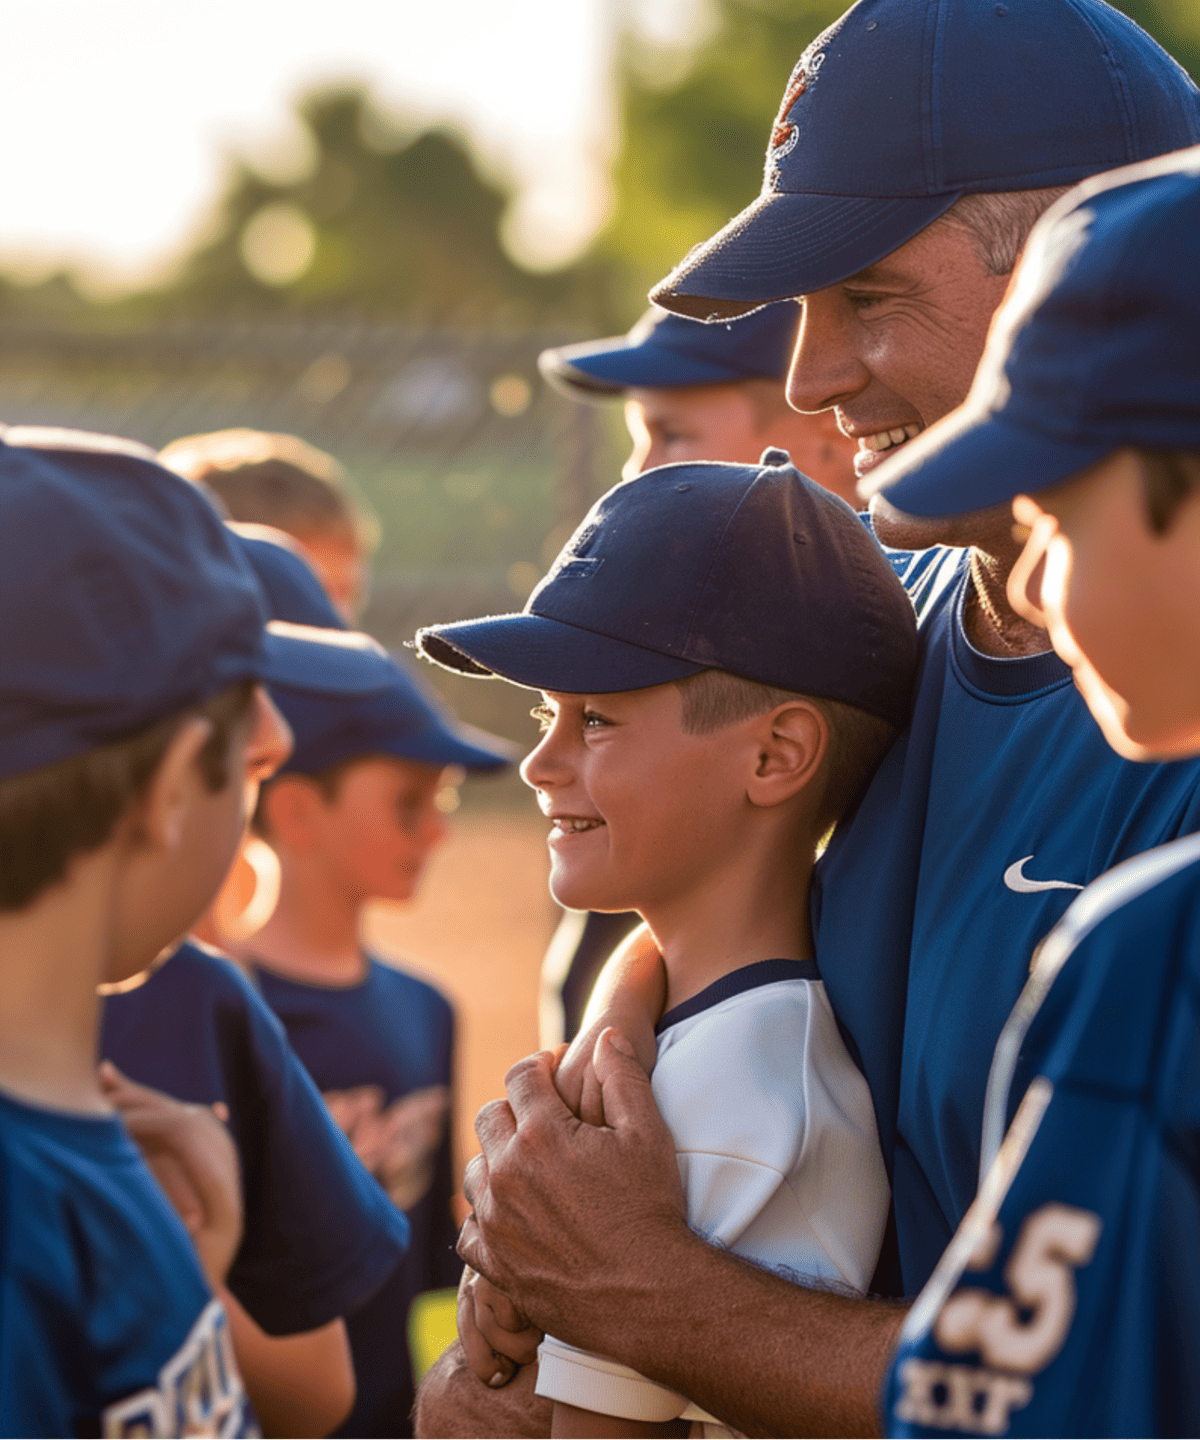 Daddy Ball Dilemma Guide for Baseball Parents